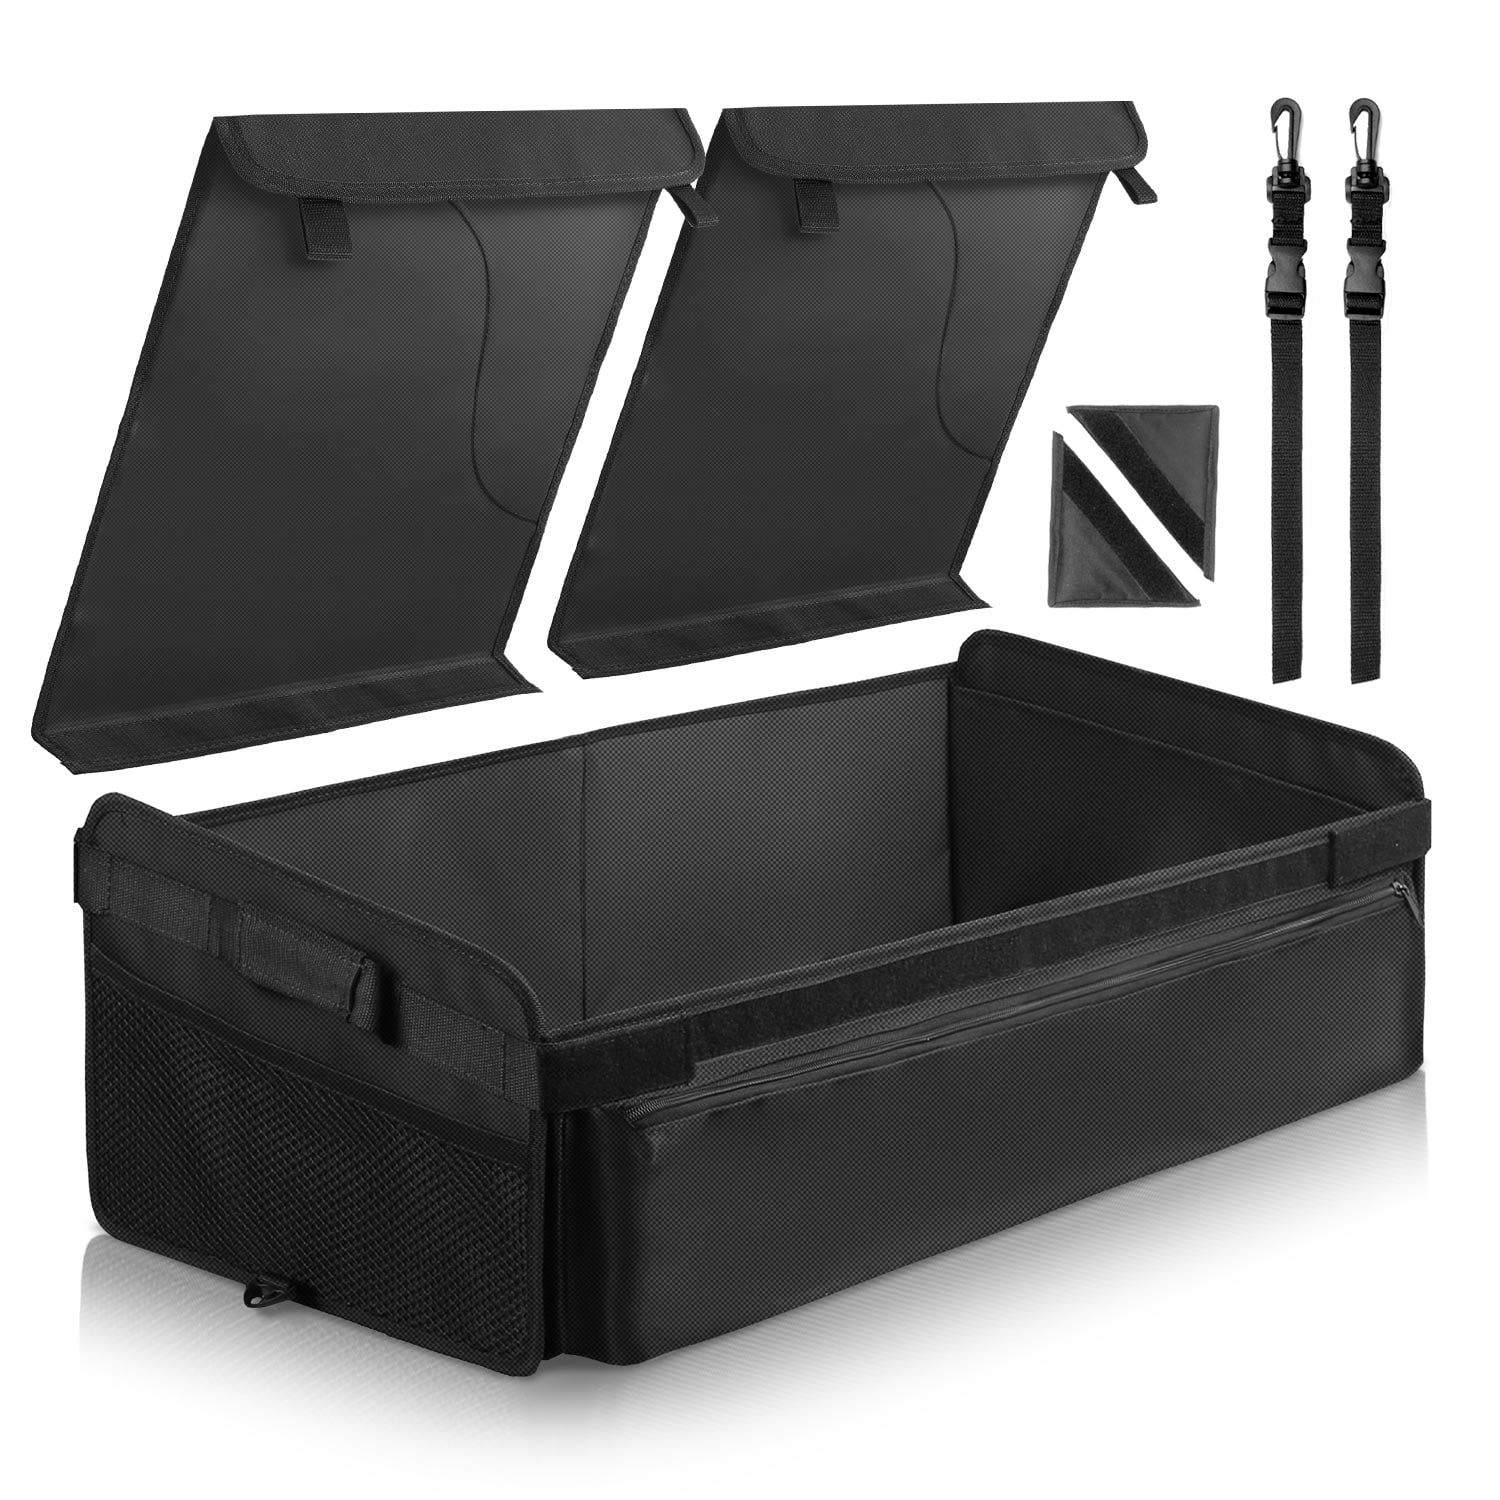 LEADALLWAY Car Trunk Organizer with Cover Foldable Cargo Storage Container